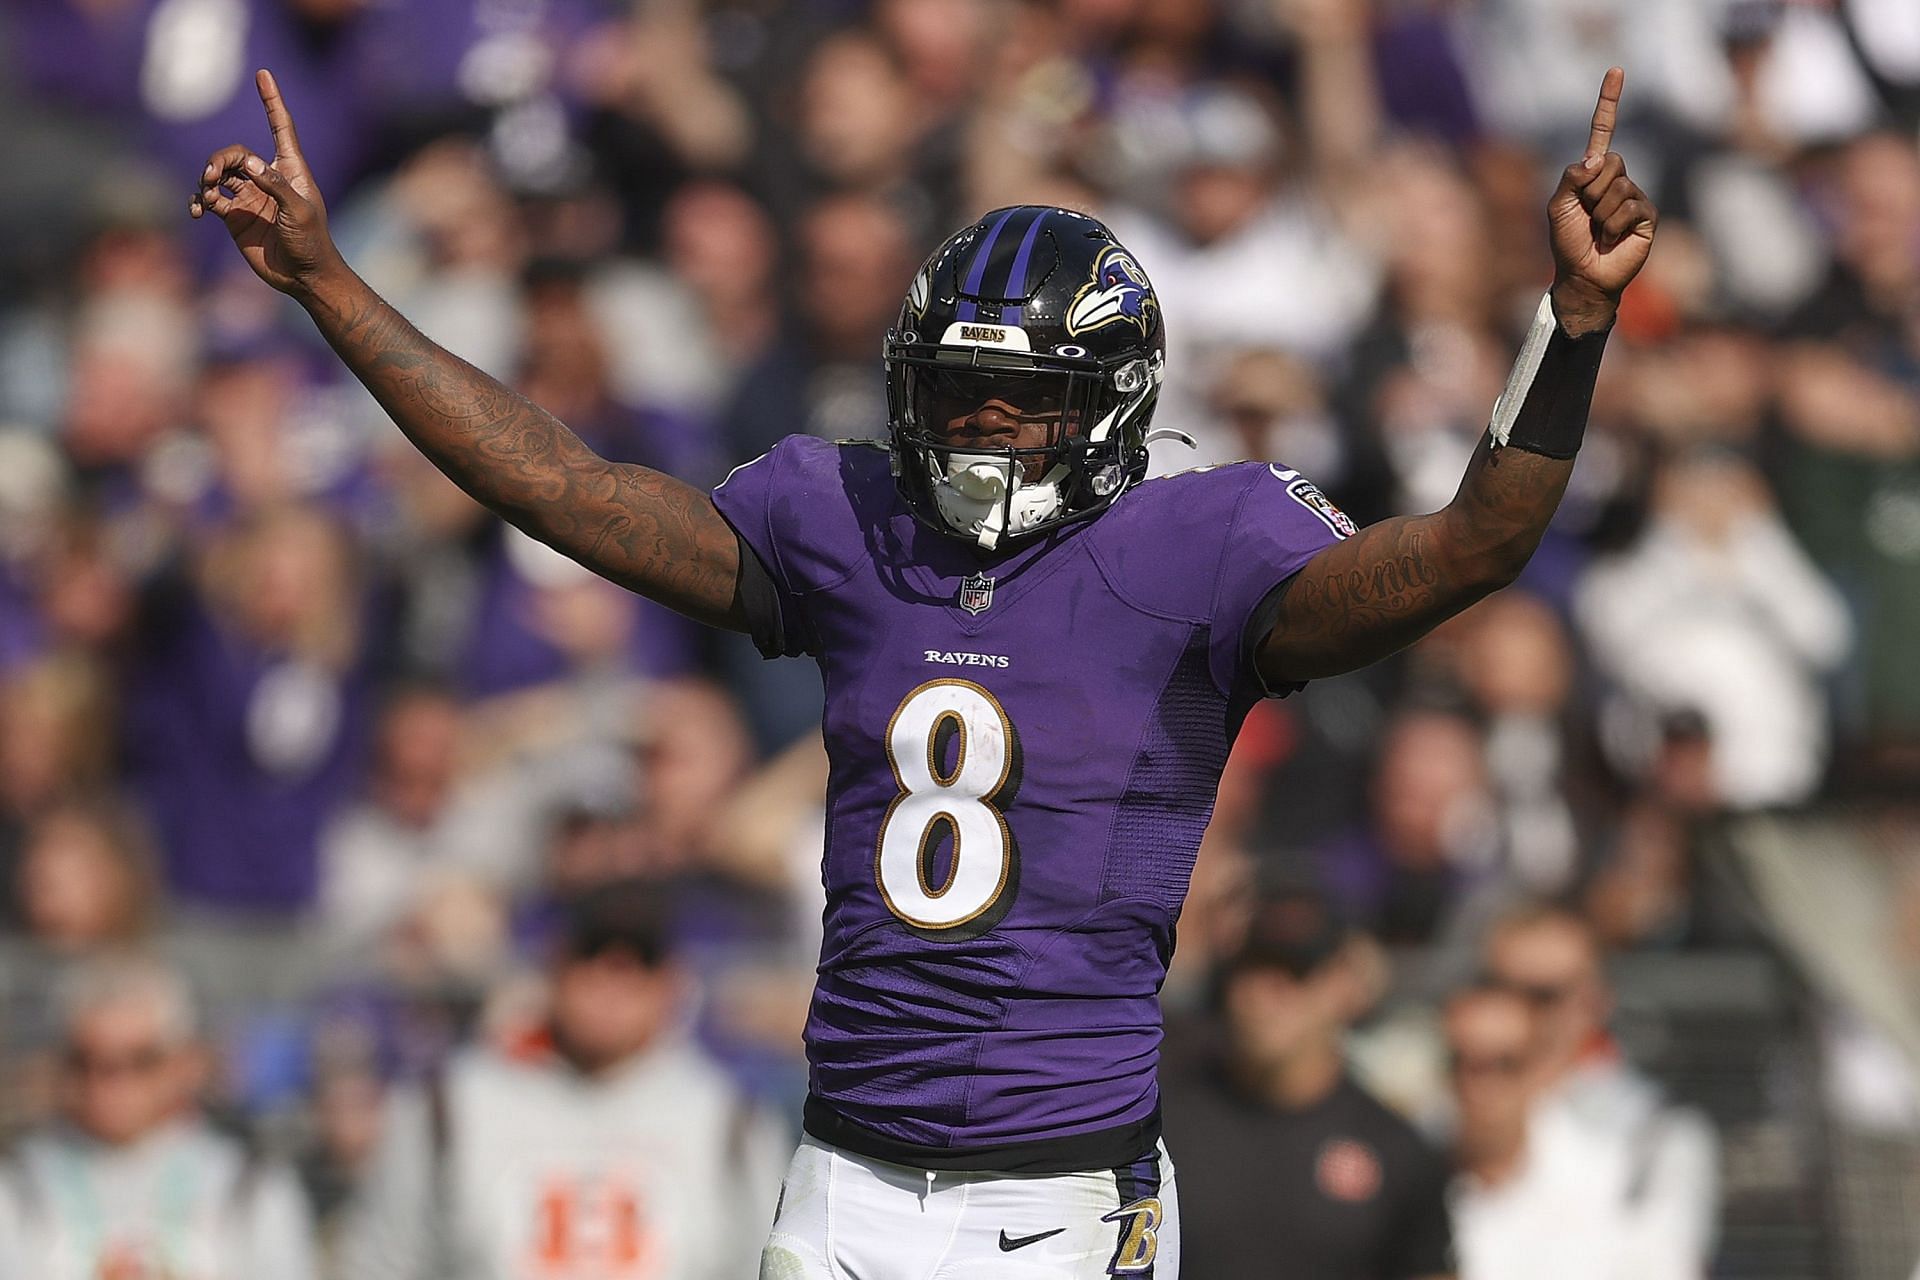 Breaking down the Ravens' player ratings in Madden 23 - Baltimore